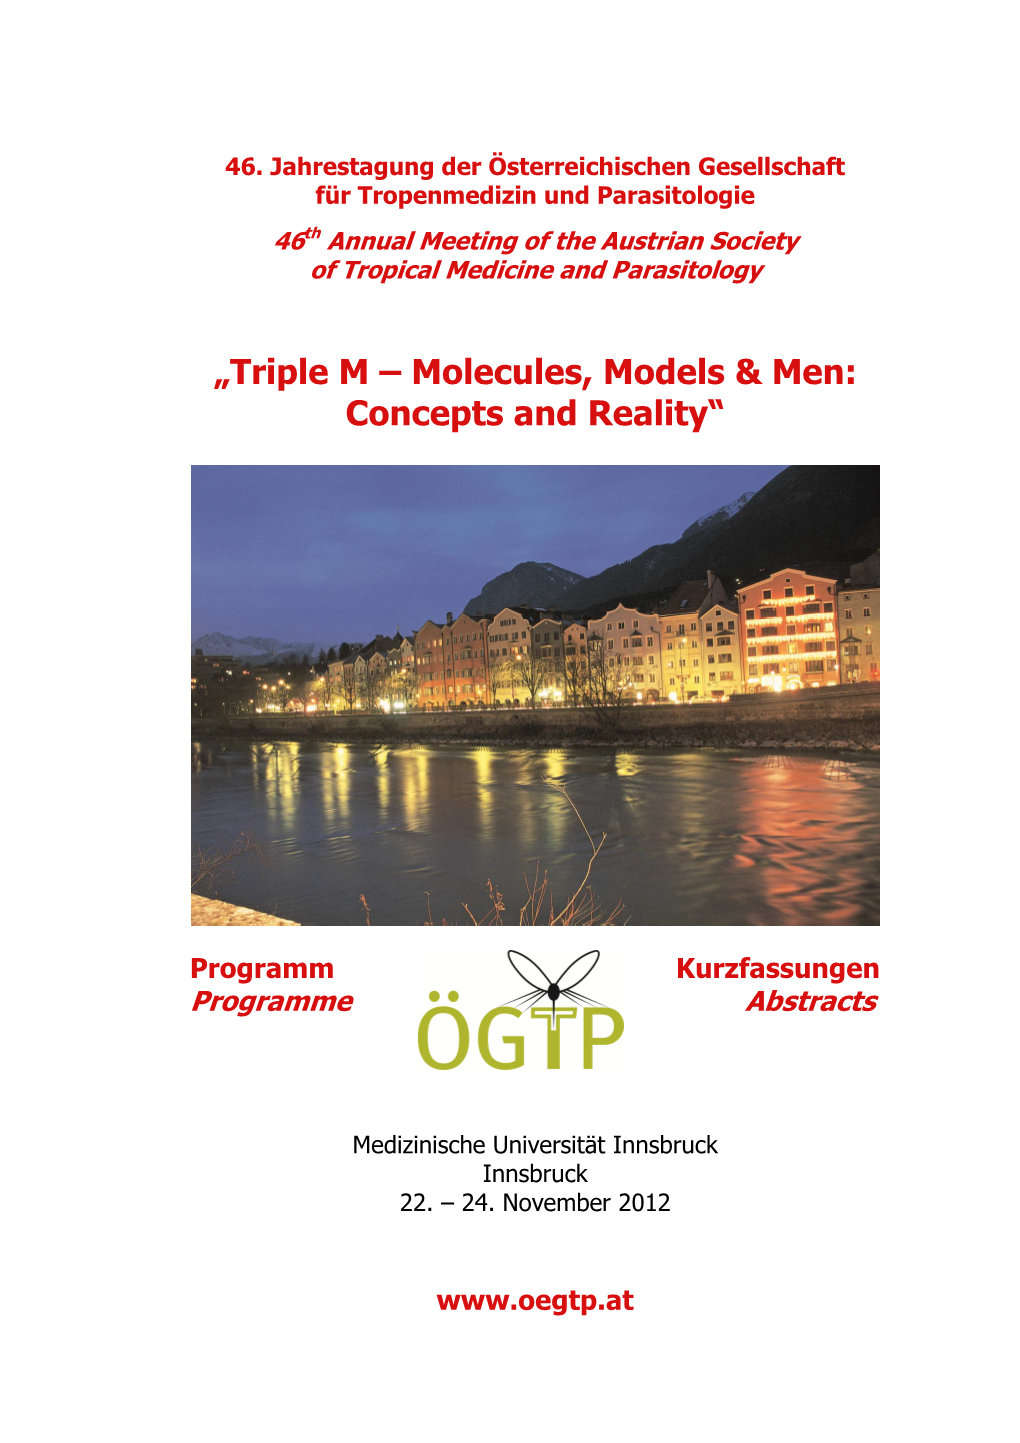 „Triple M – Molecules, Models & Men: Concepts and Reality“